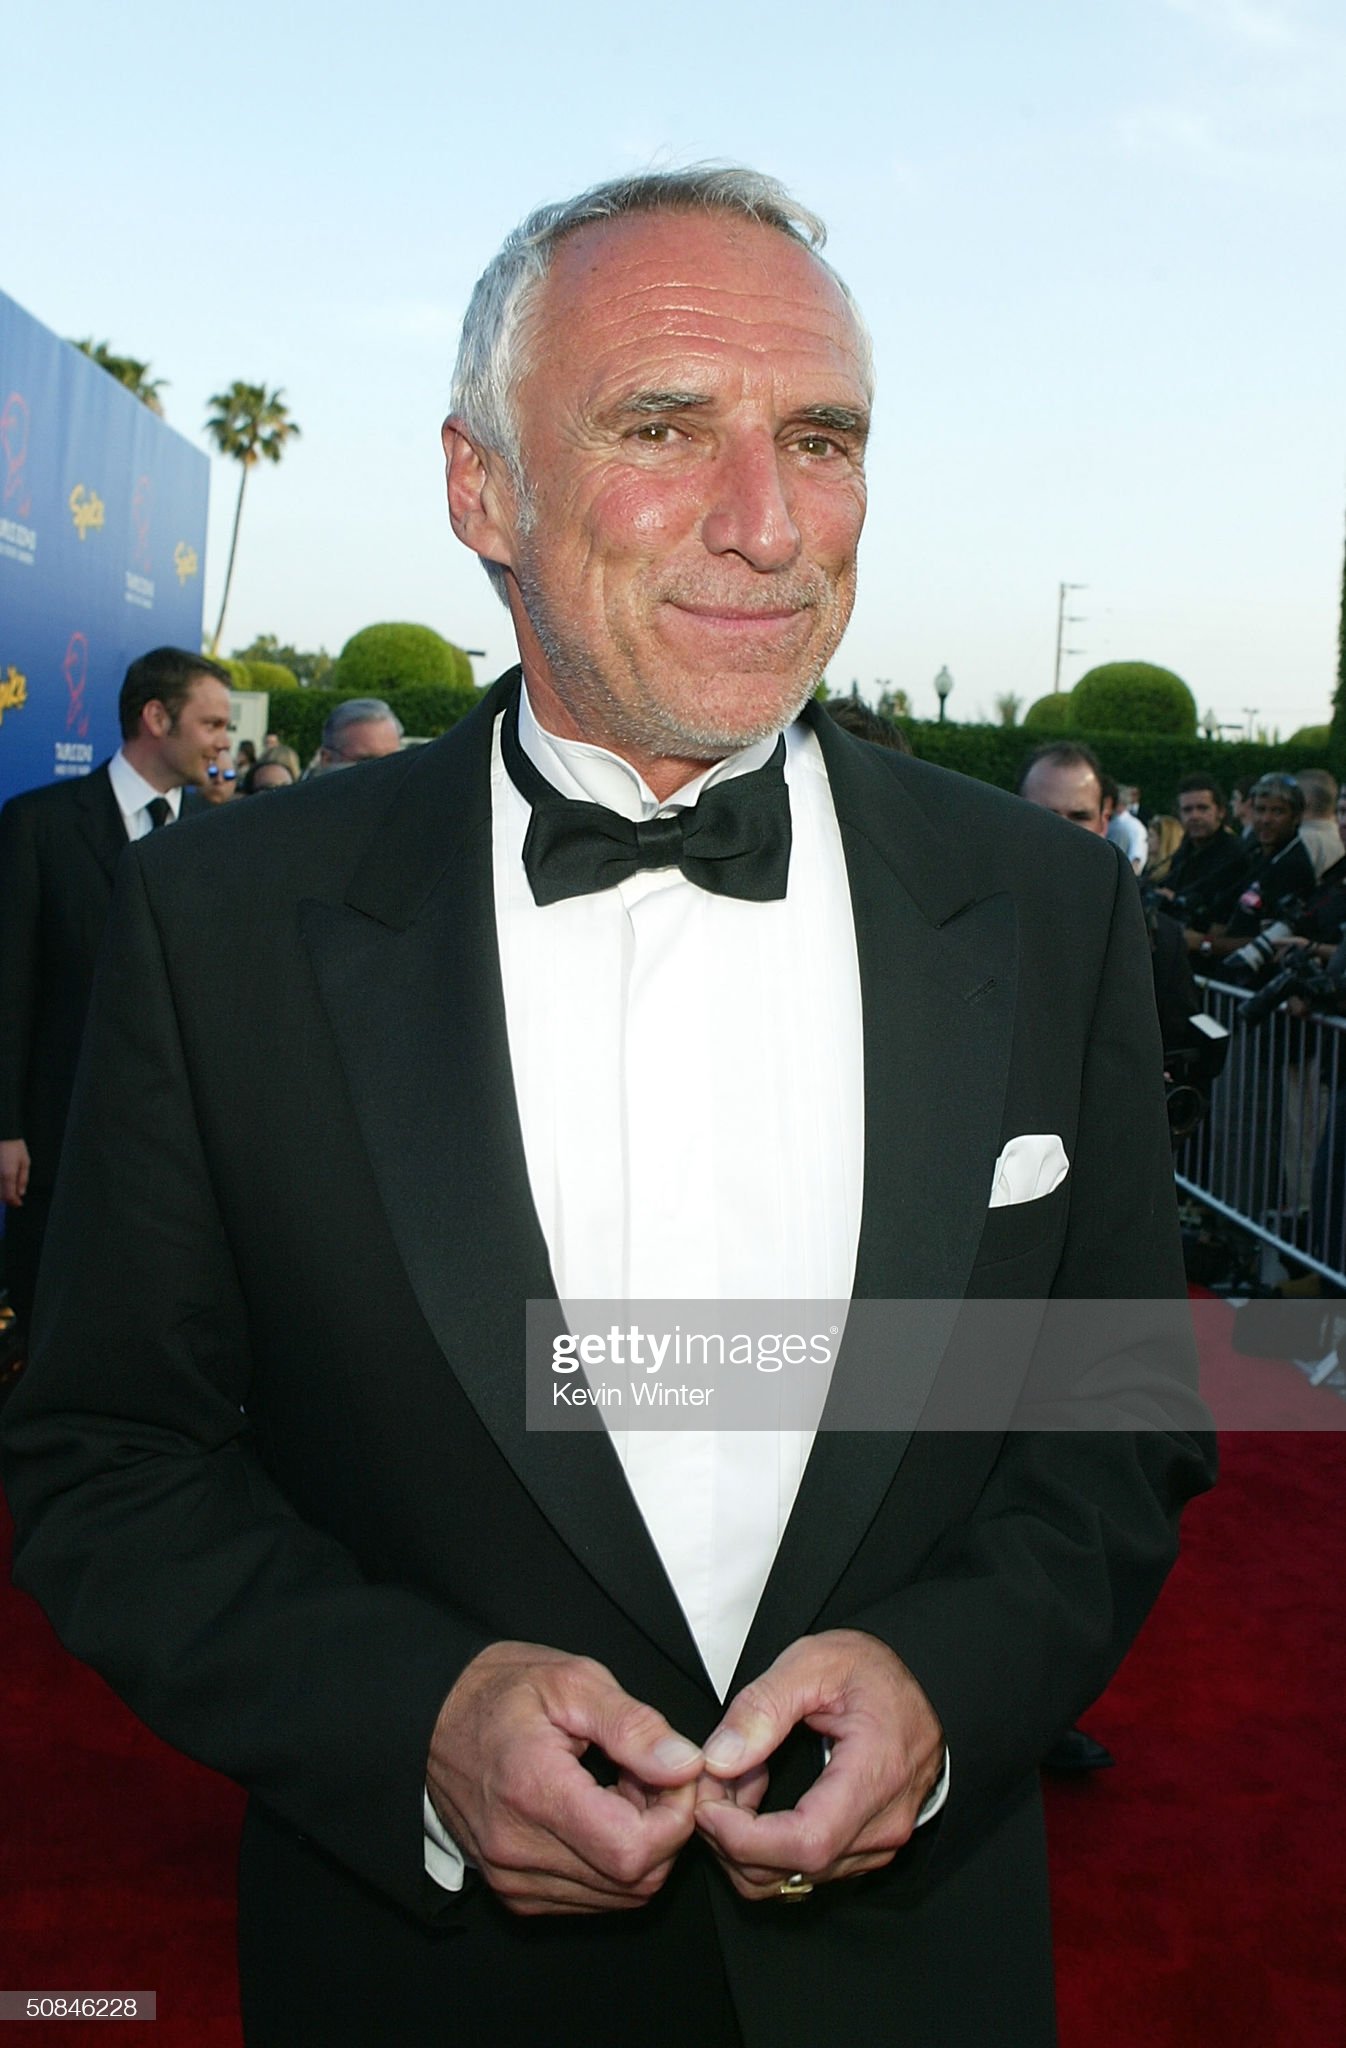 Dieter Mateschitz, head of the Red Bull energy drink company, attends the 4th Annual Taurus World Stunt Awards.